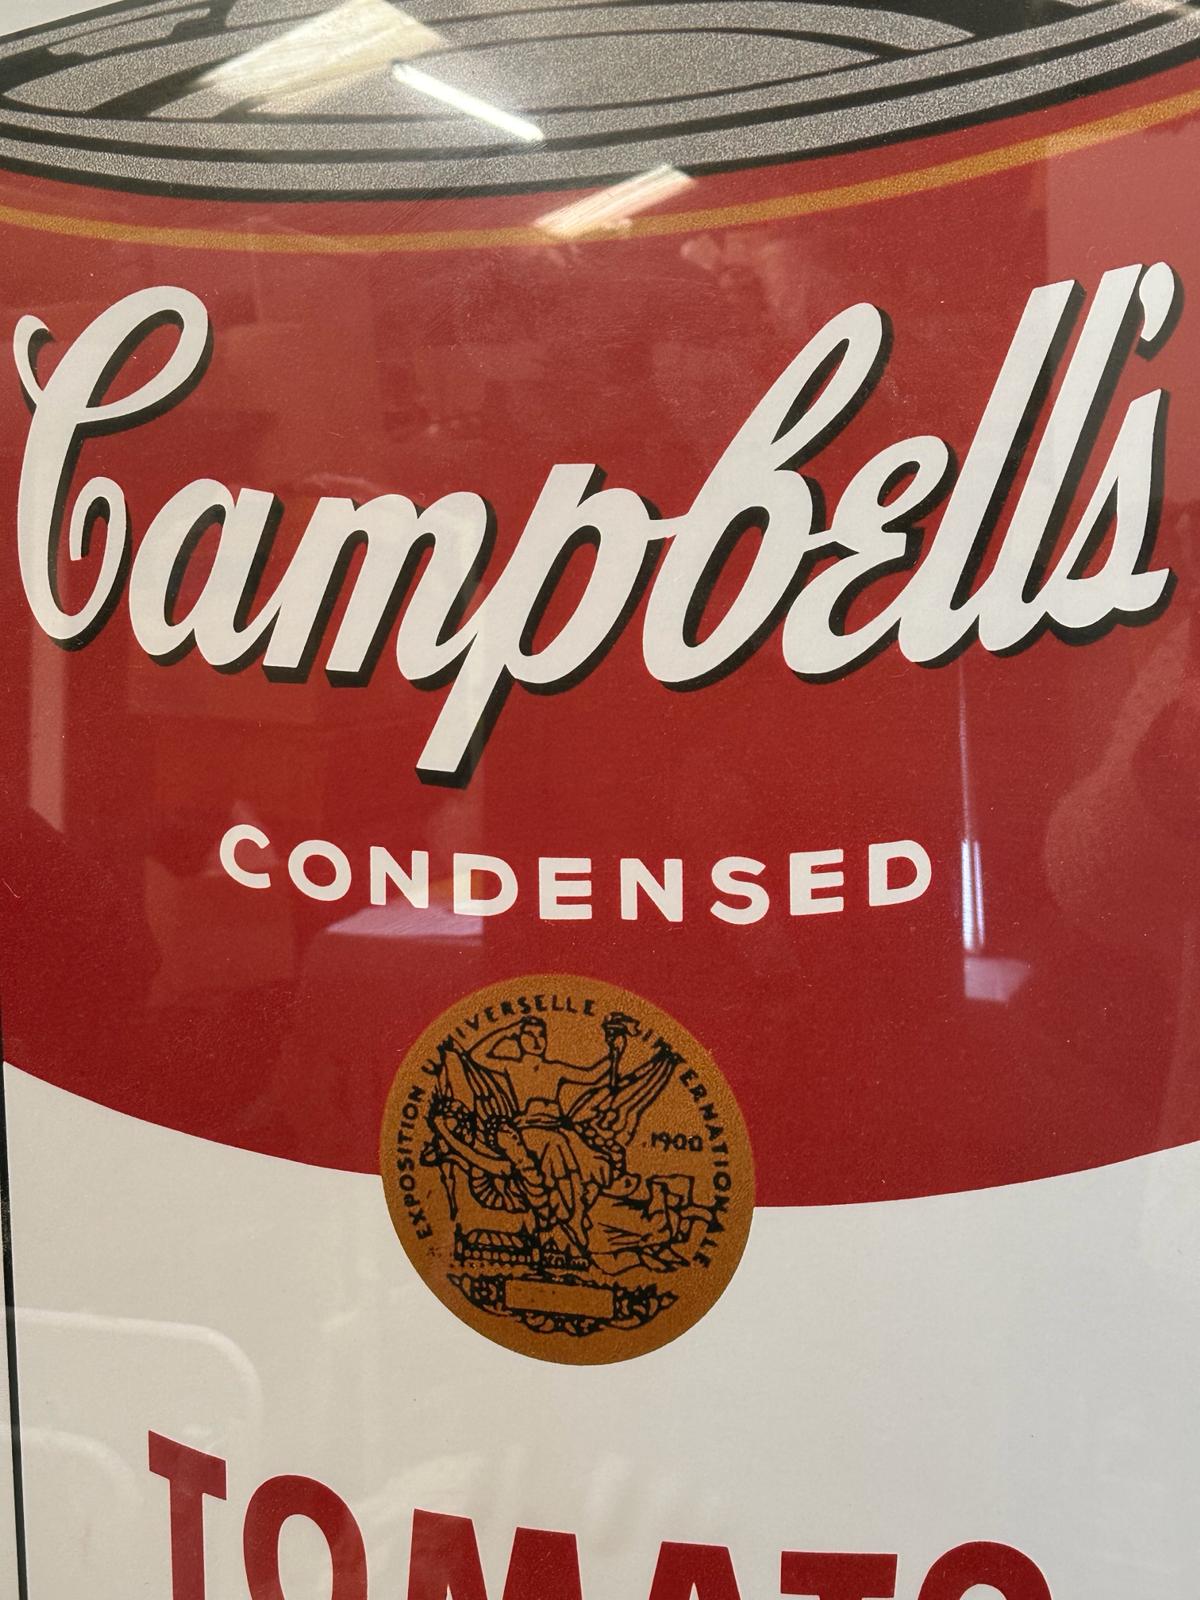 A vintage framed Campbells condensed Tomato soup poster from The Andy Warhol collection 67cm x 118cm - Image 2 of 2